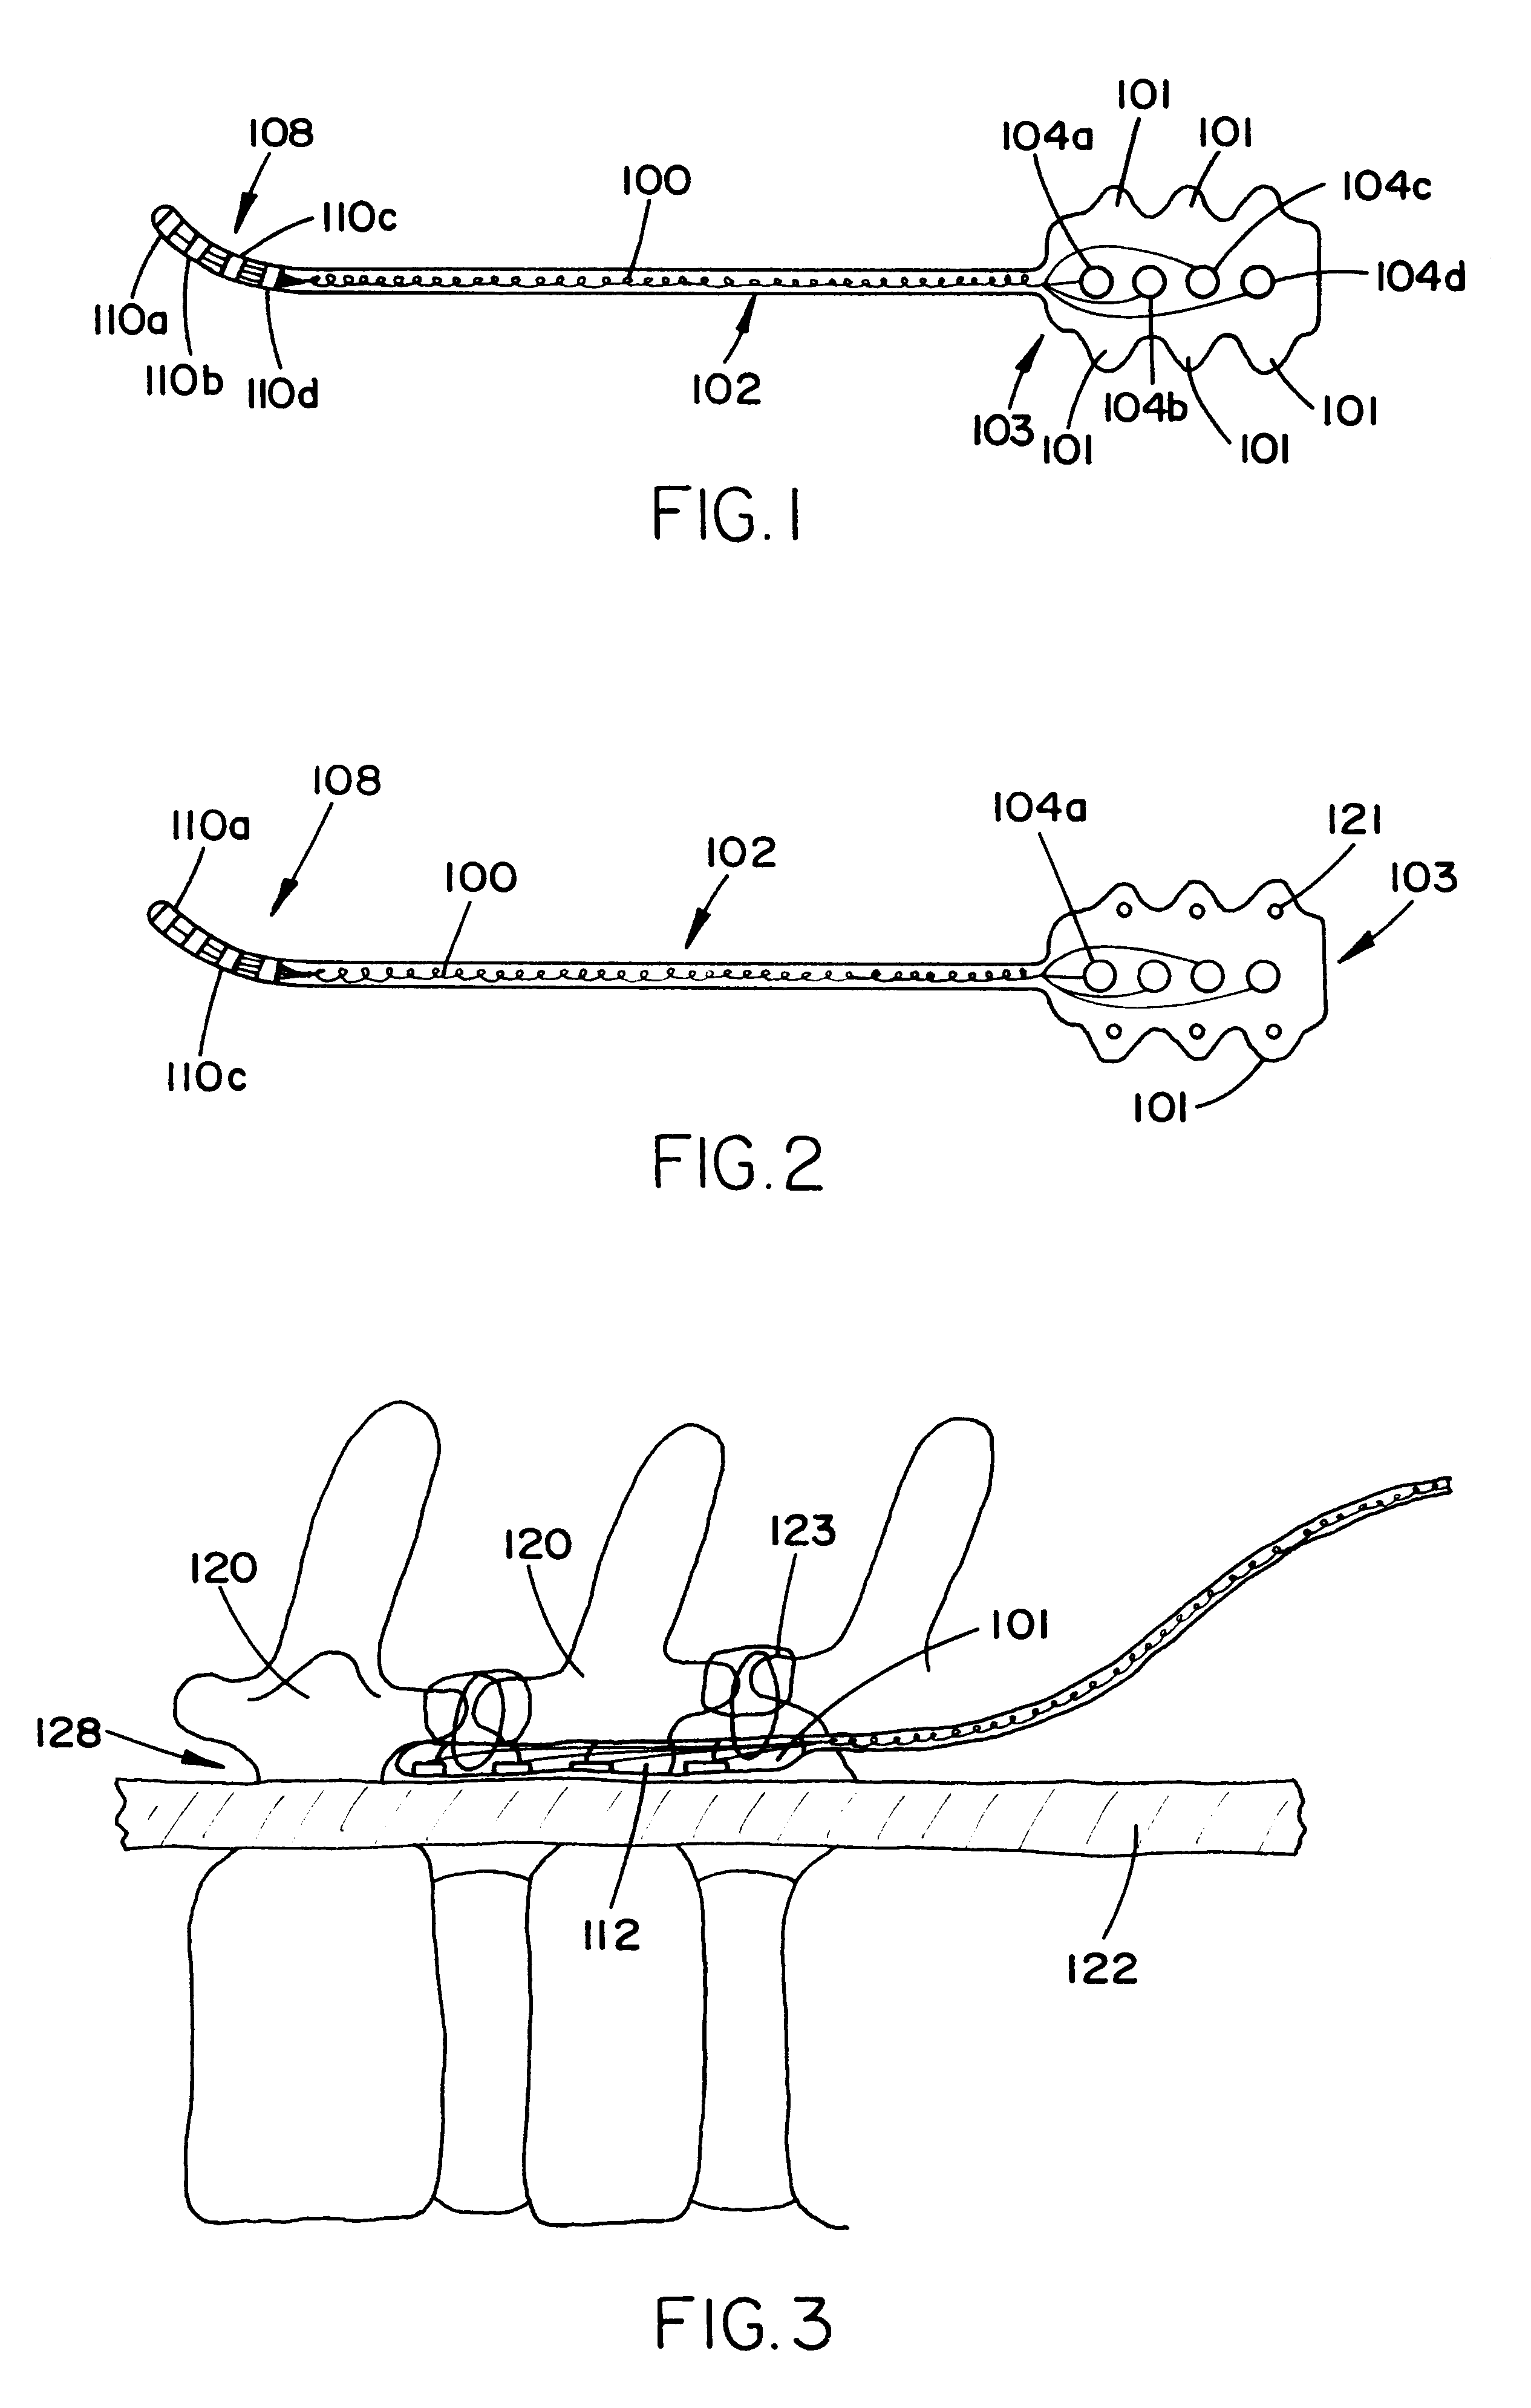 Spinal cord electrode assembly having laterally extending portions